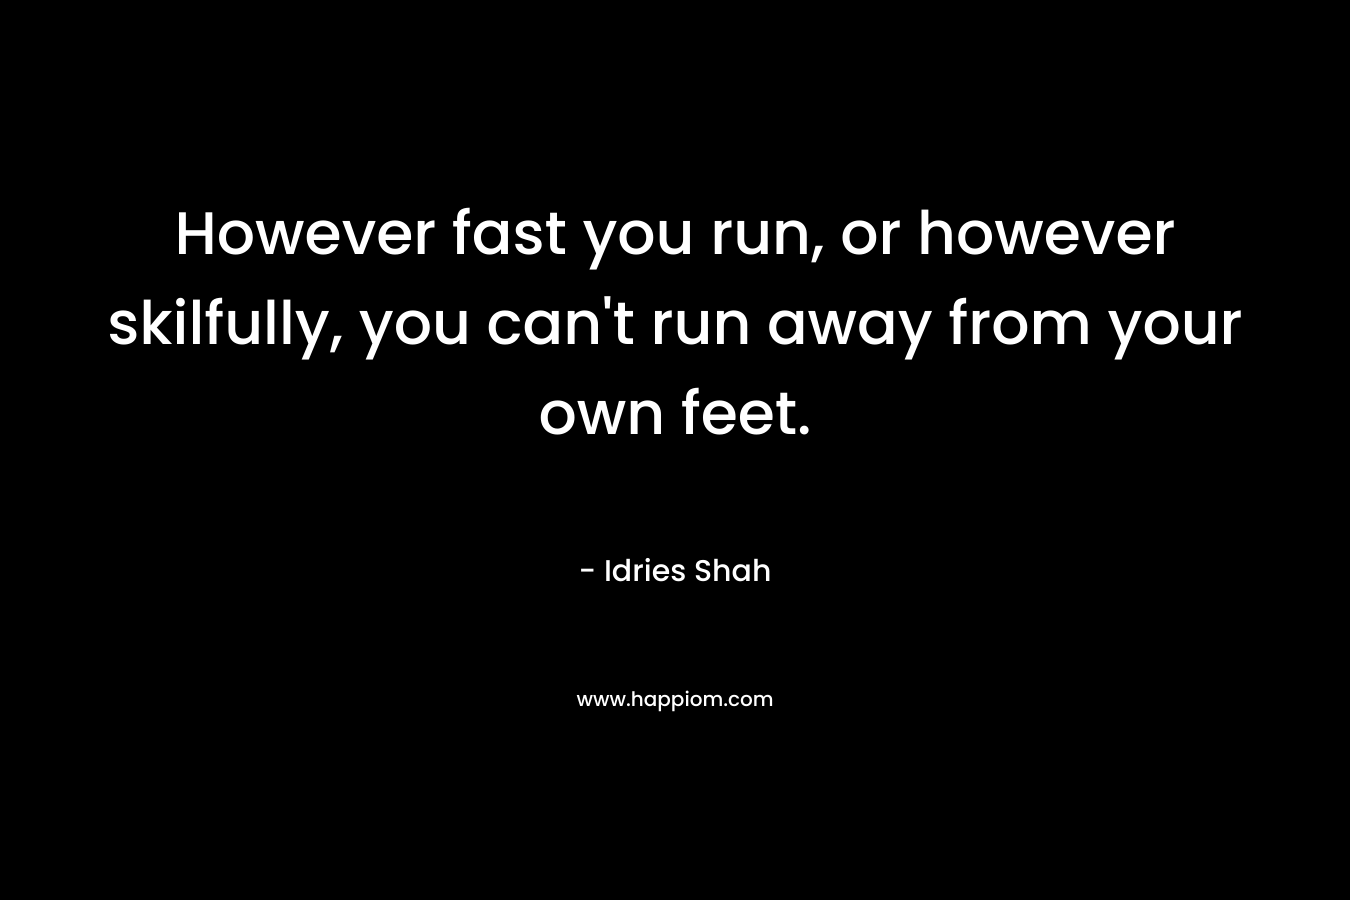 However fast you run, or however skilfully, you can't run away from your own feet.